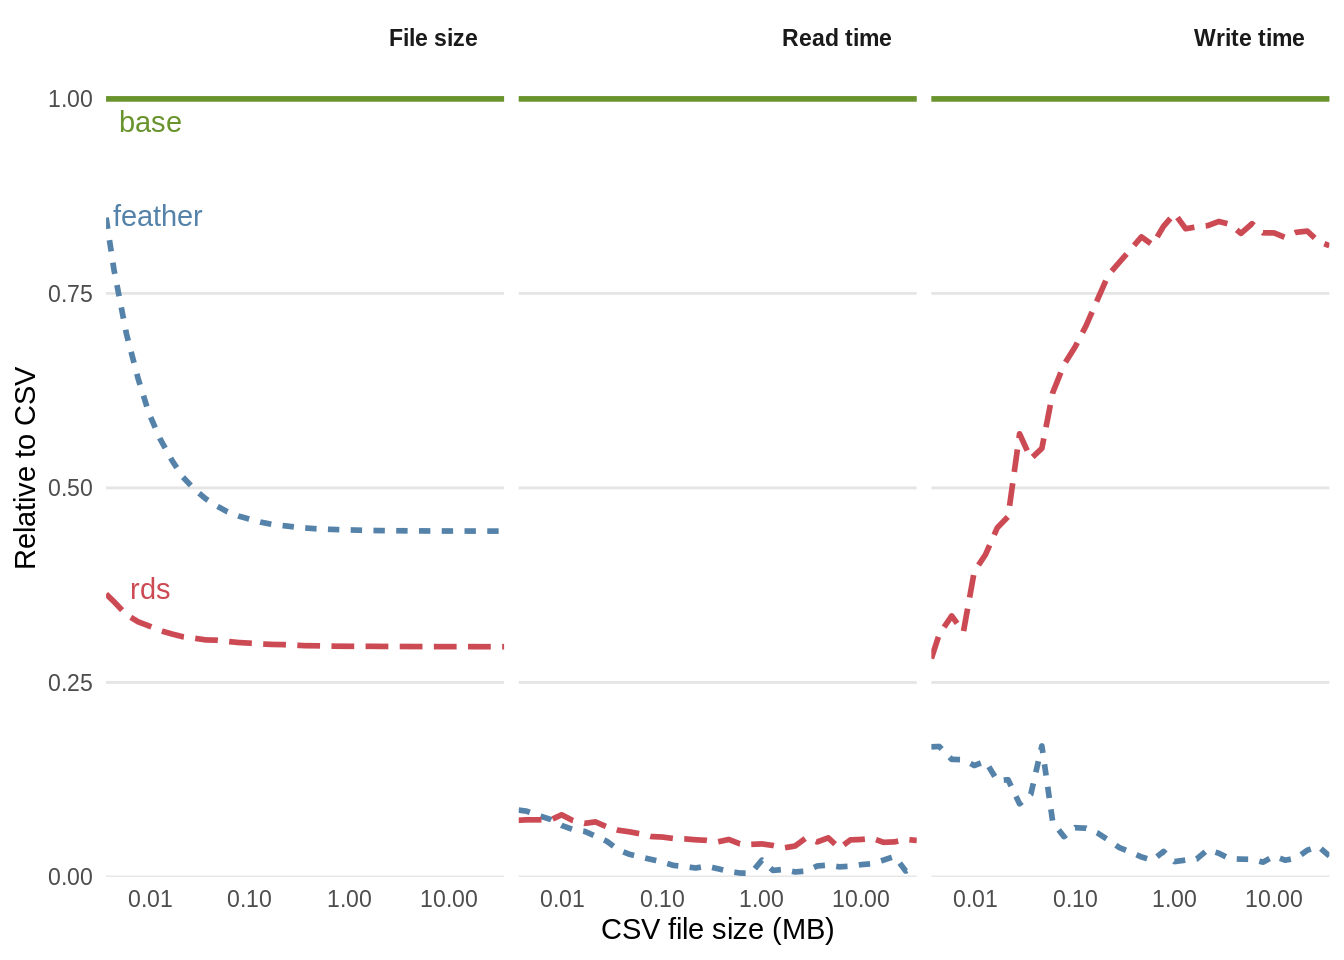 Comparison of the performance of binary formats for reading and writing datasets with 20 column with the plain text format CSV. The functions used to read the files were read.csv(), readRDS() and feather::read_feather() respectively. The functions used to write the files were write.csv(), saveRDS() and feather::write_feather().